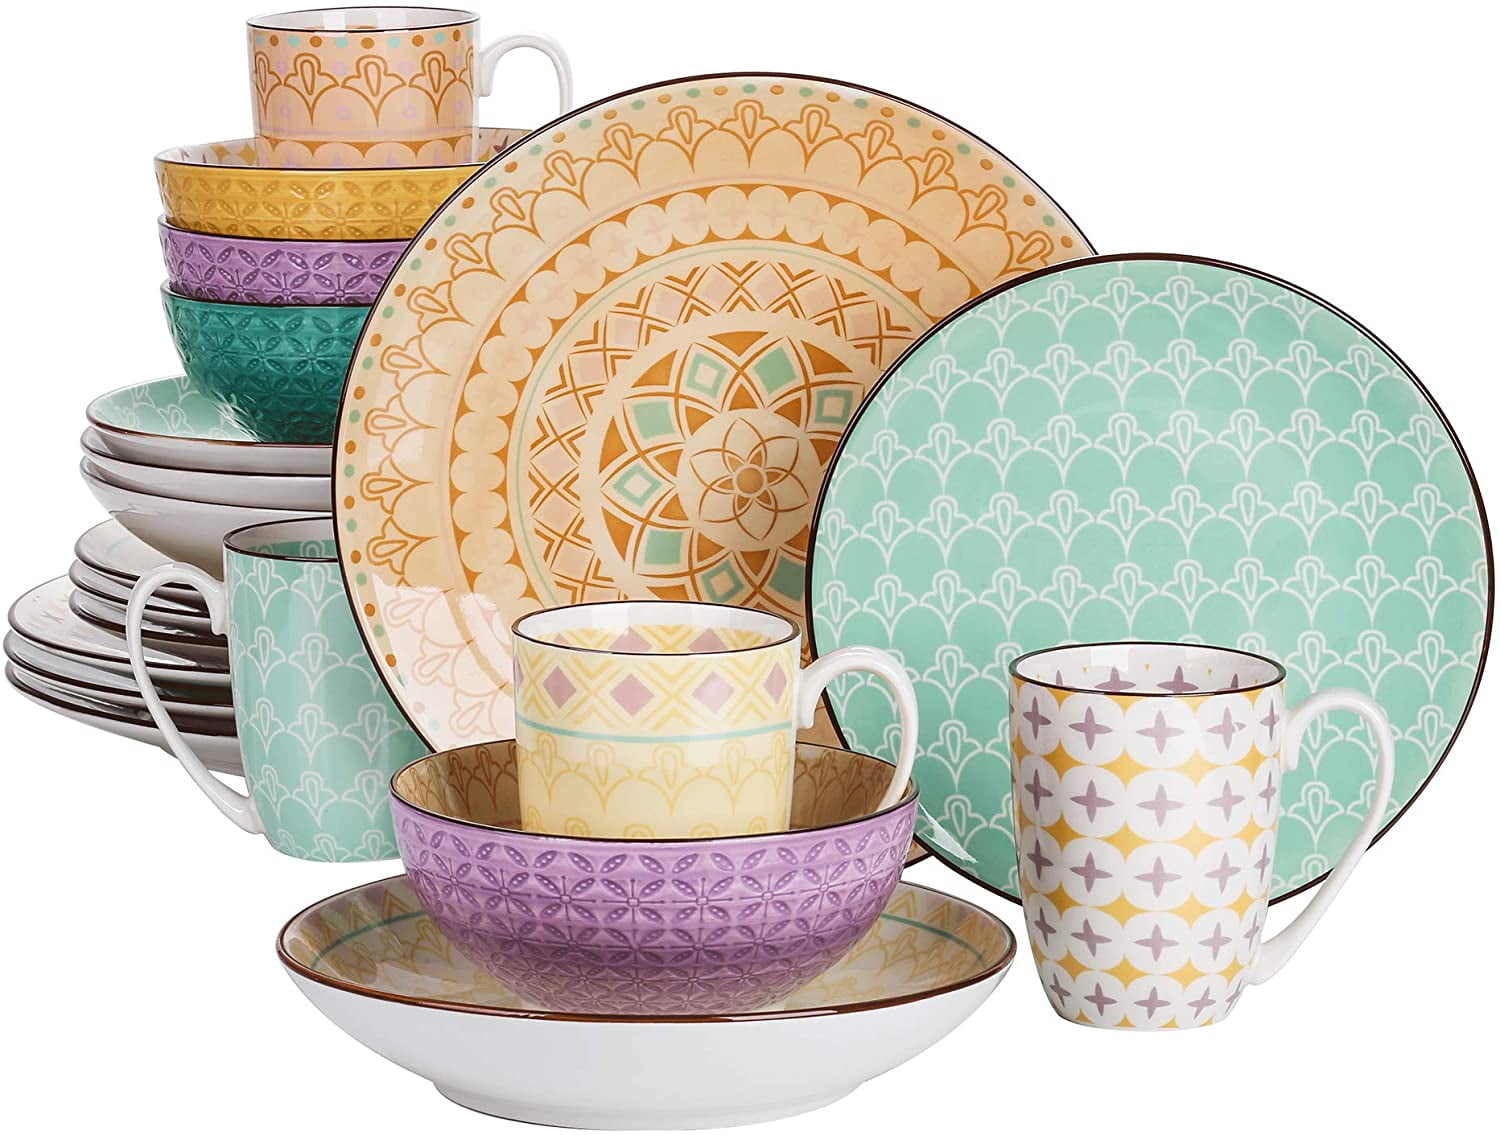 Series CLAY Porcelain Marbling Dinnerware Set with Plates Bowls & Mugs Details about   vancasso 